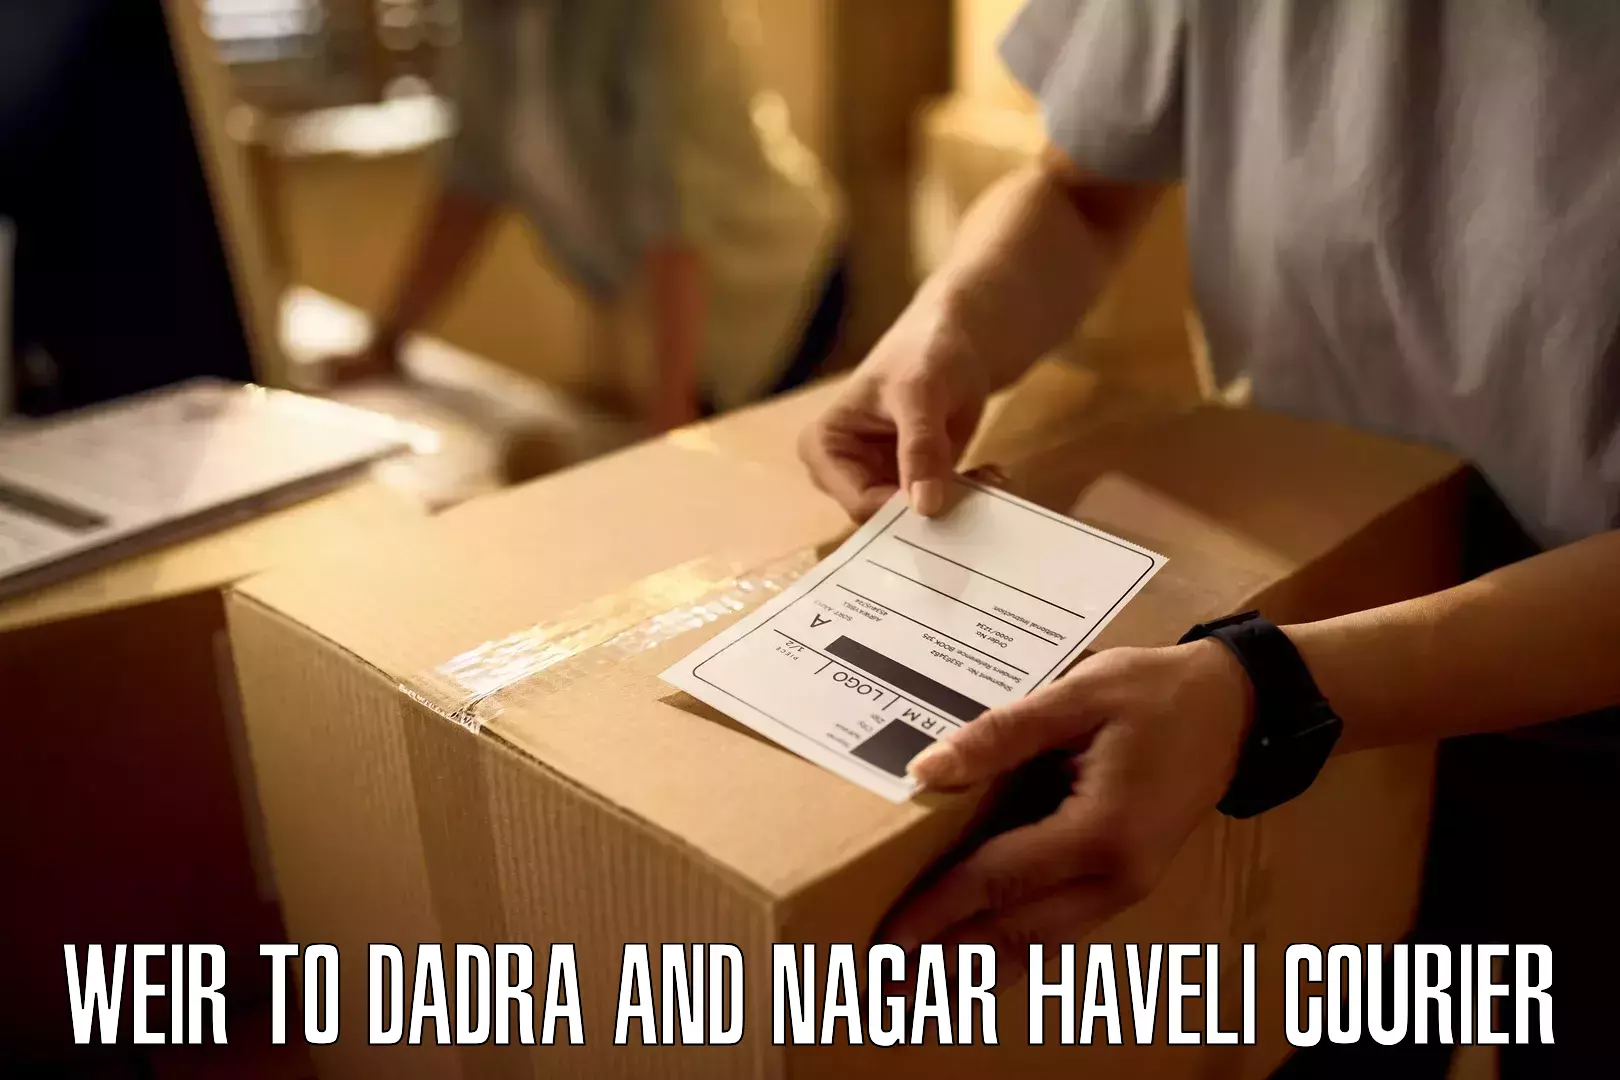 Courier service partnerships Weir to Dadra and Nagar Haveli